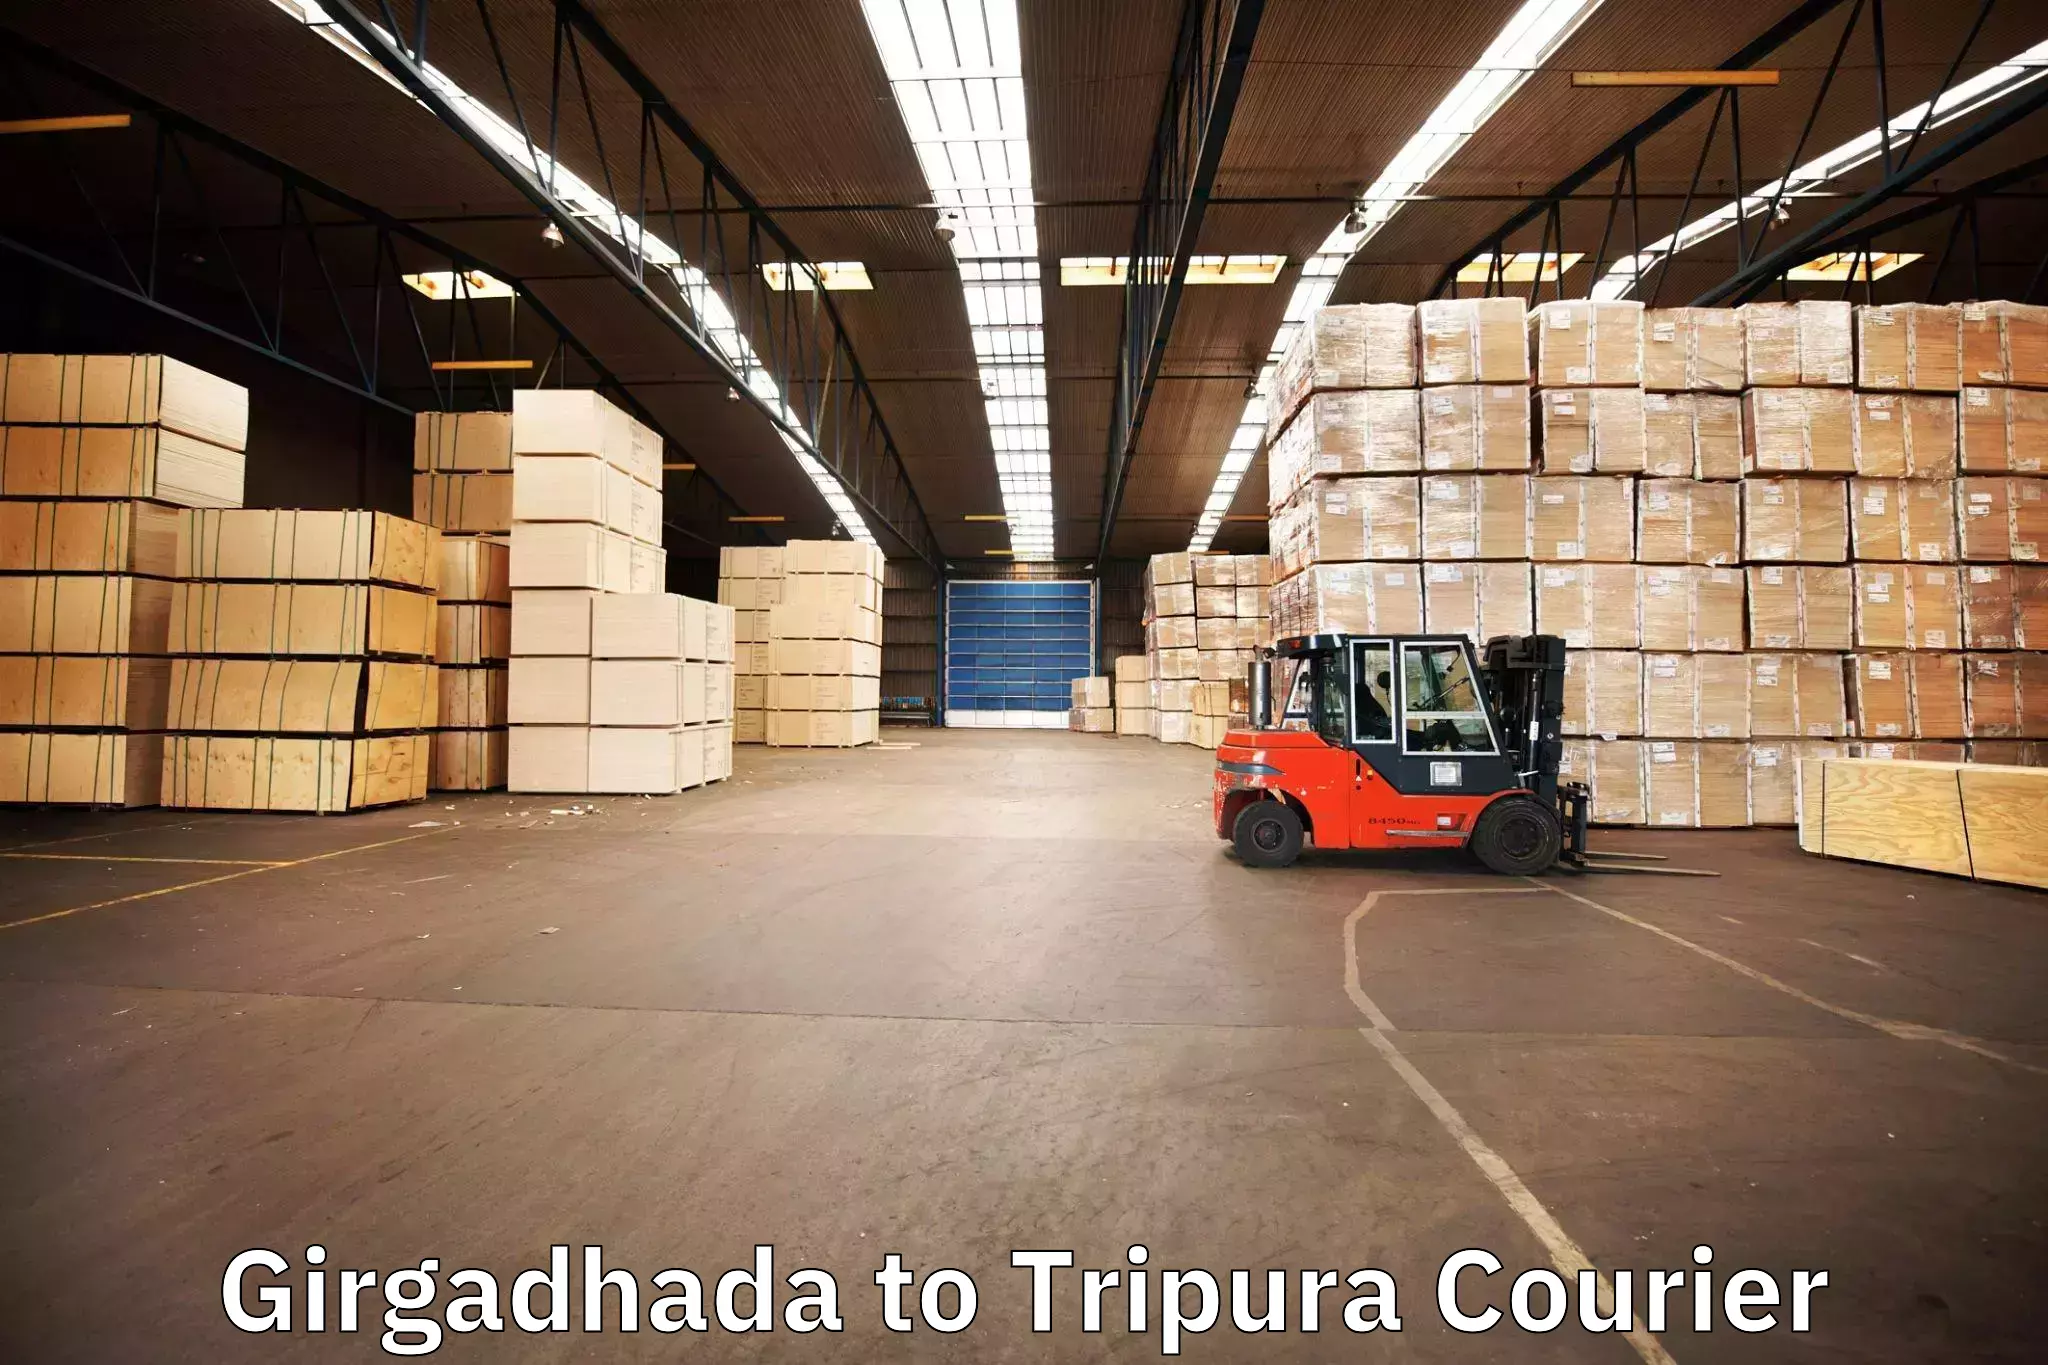 Personalized moving plans in Girgadhada to Udaipur Tripura